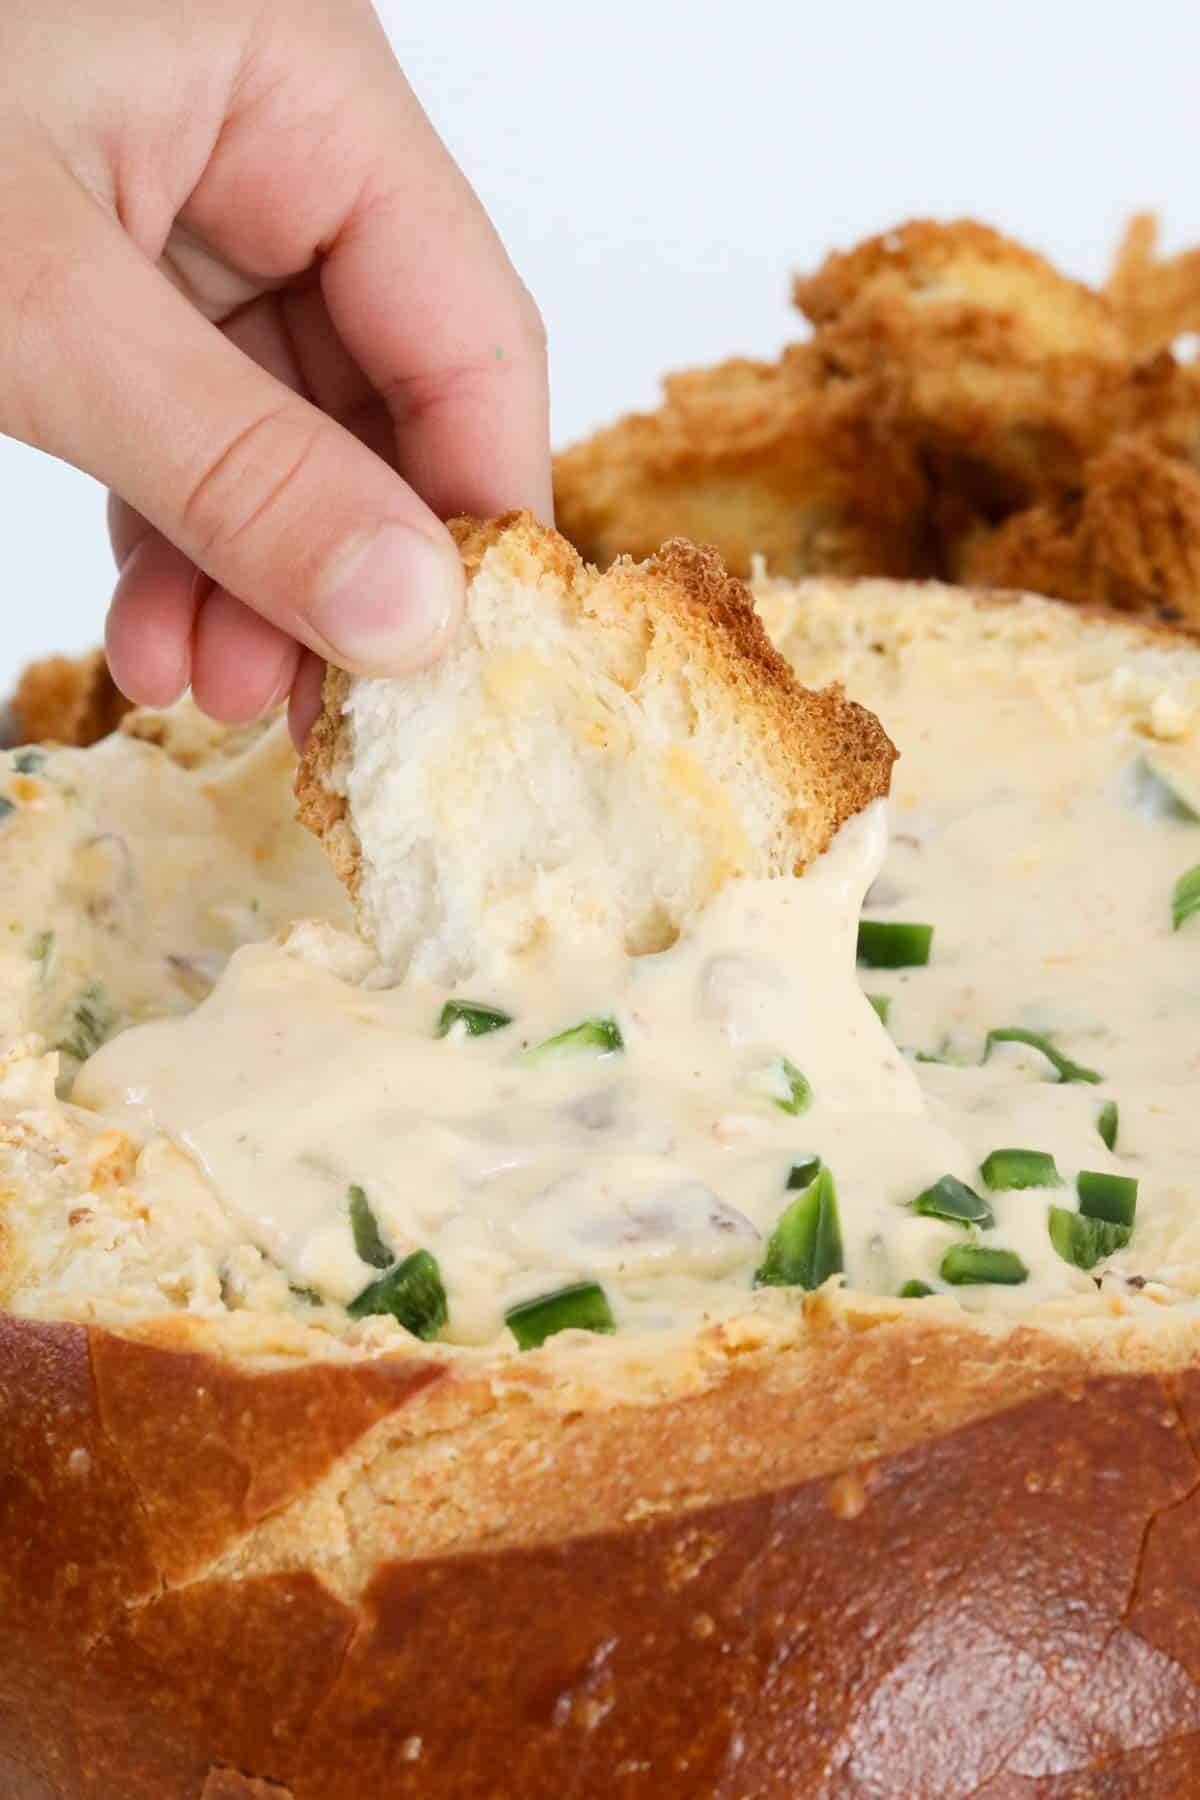 A hand dipping a pieces of baked bread into Jalapeño popper cob loaf.